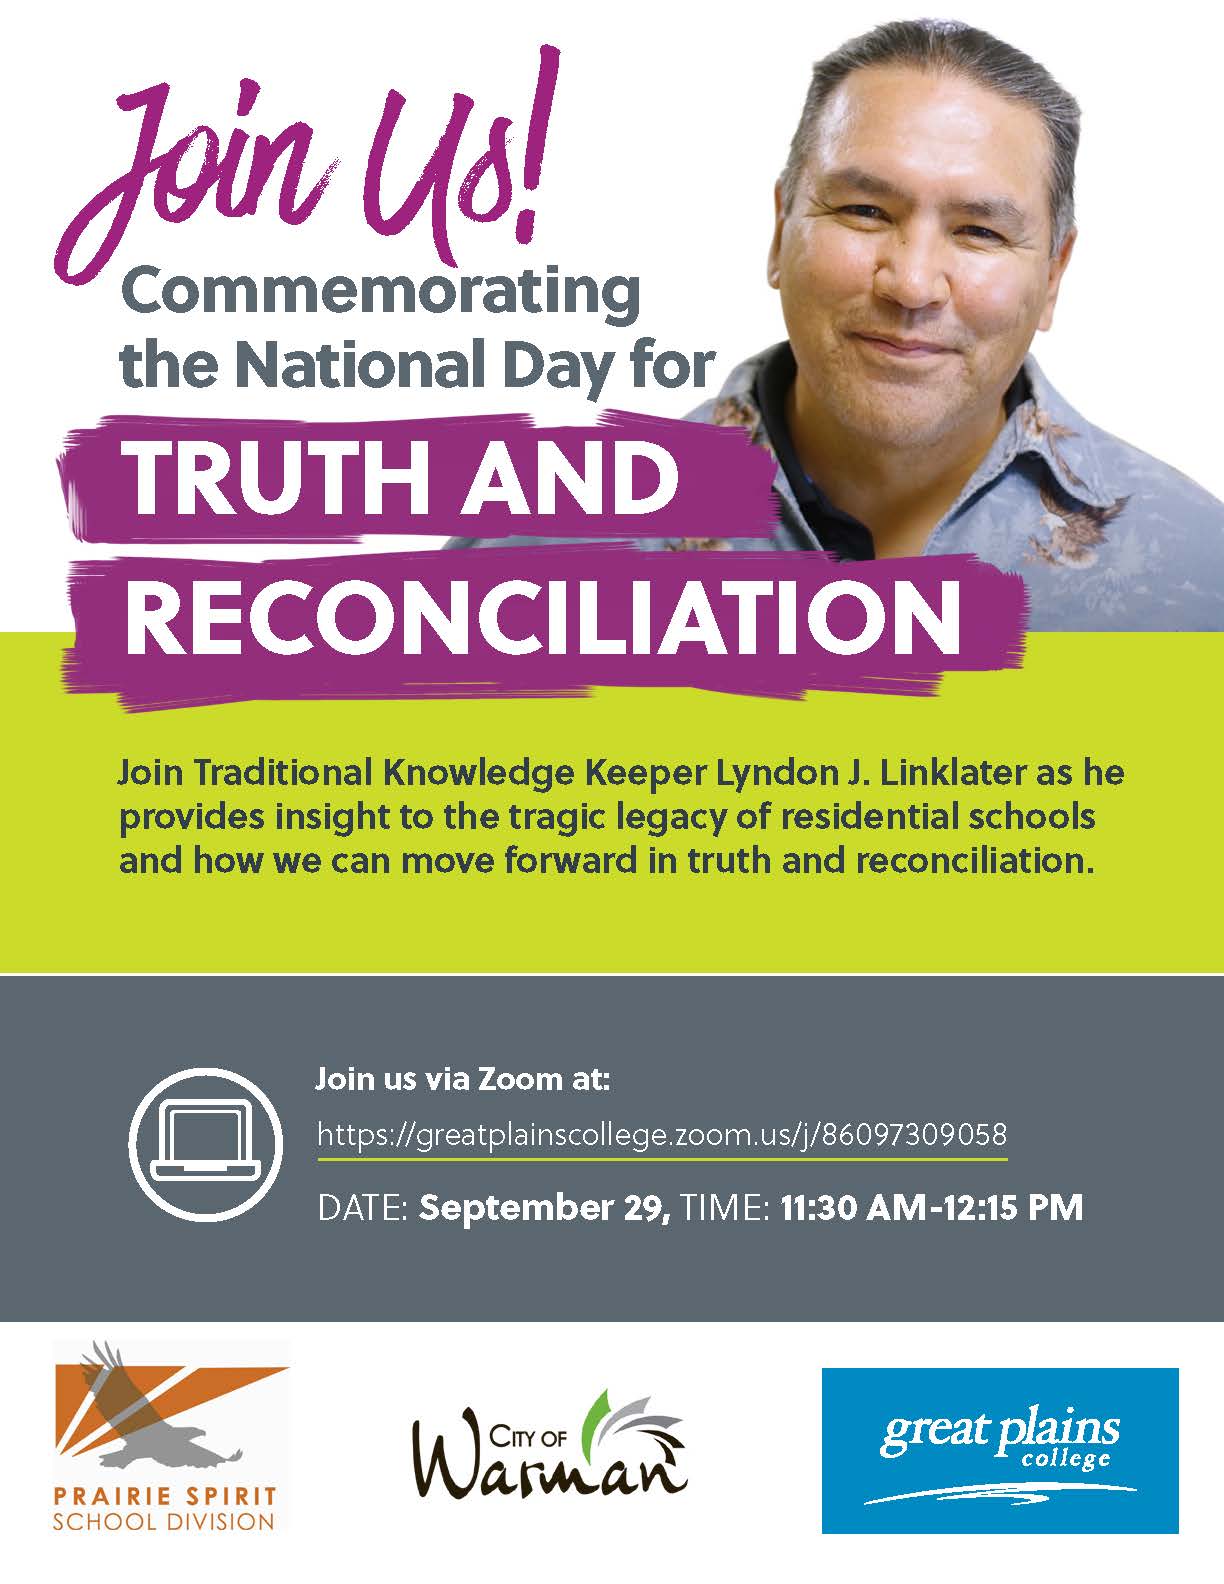 Commemorating the National Day for Truth and Reconciliation